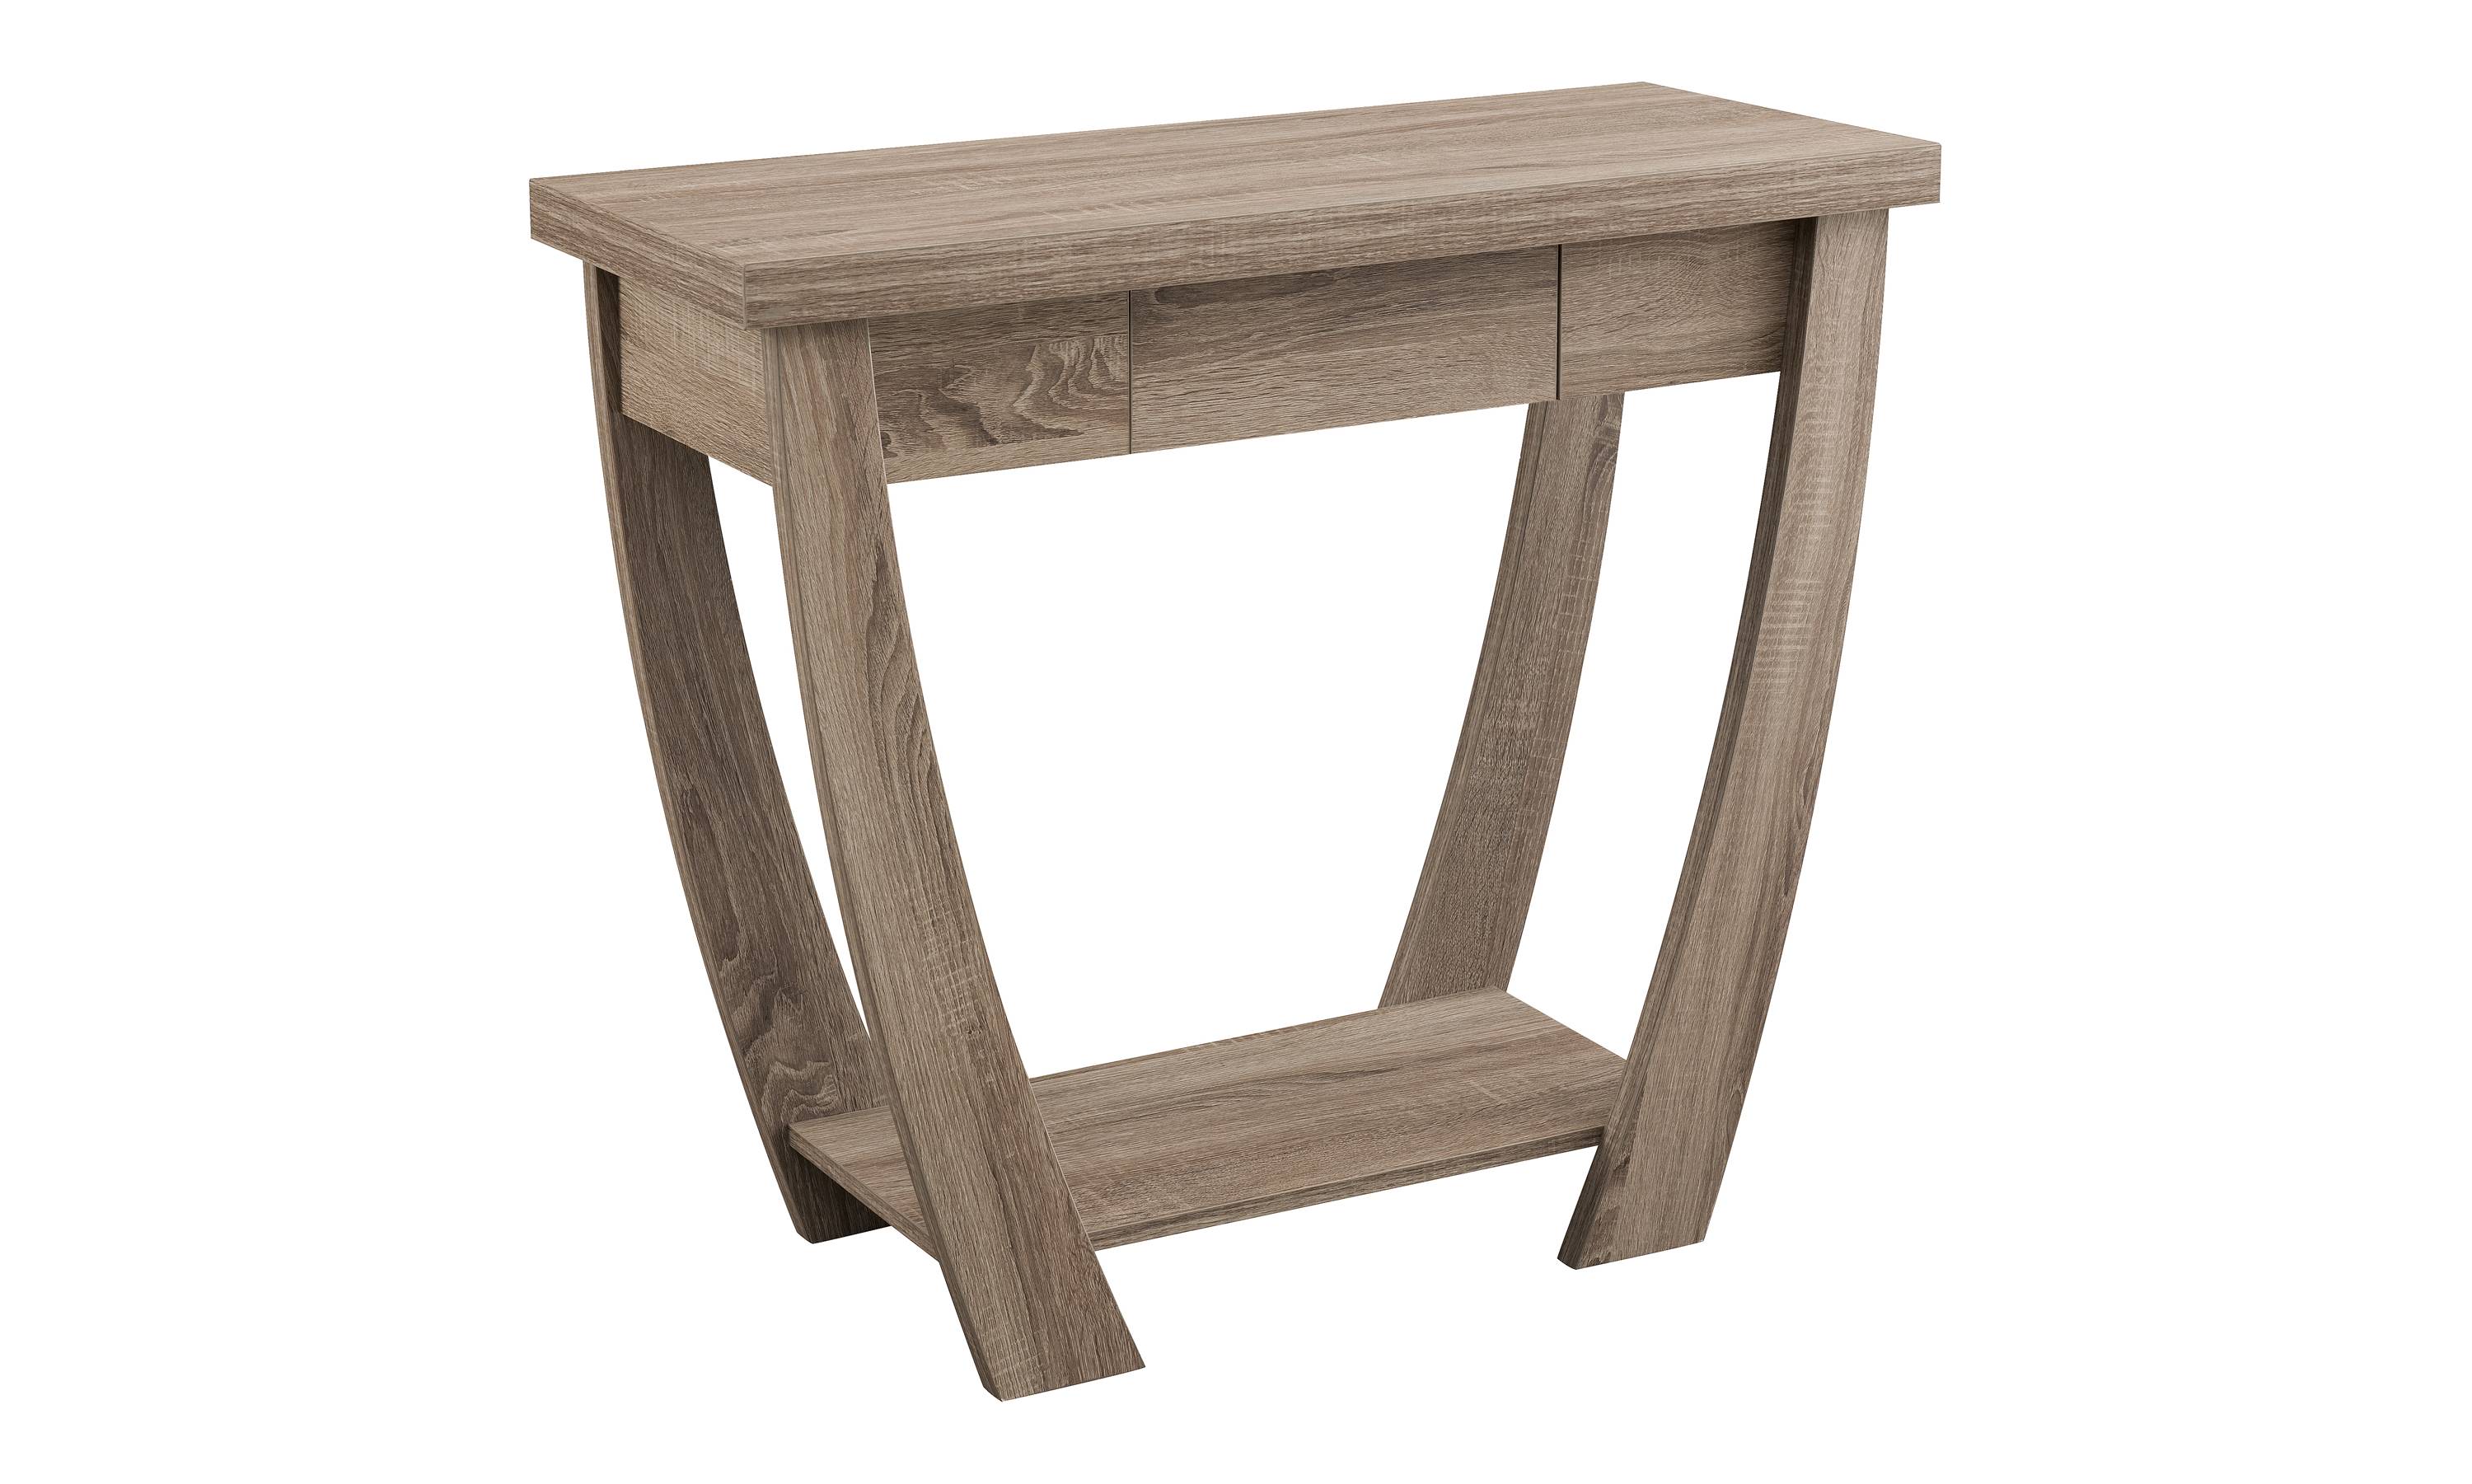 The Perfect Entryway Table Under 100 Upright And Caffeinated